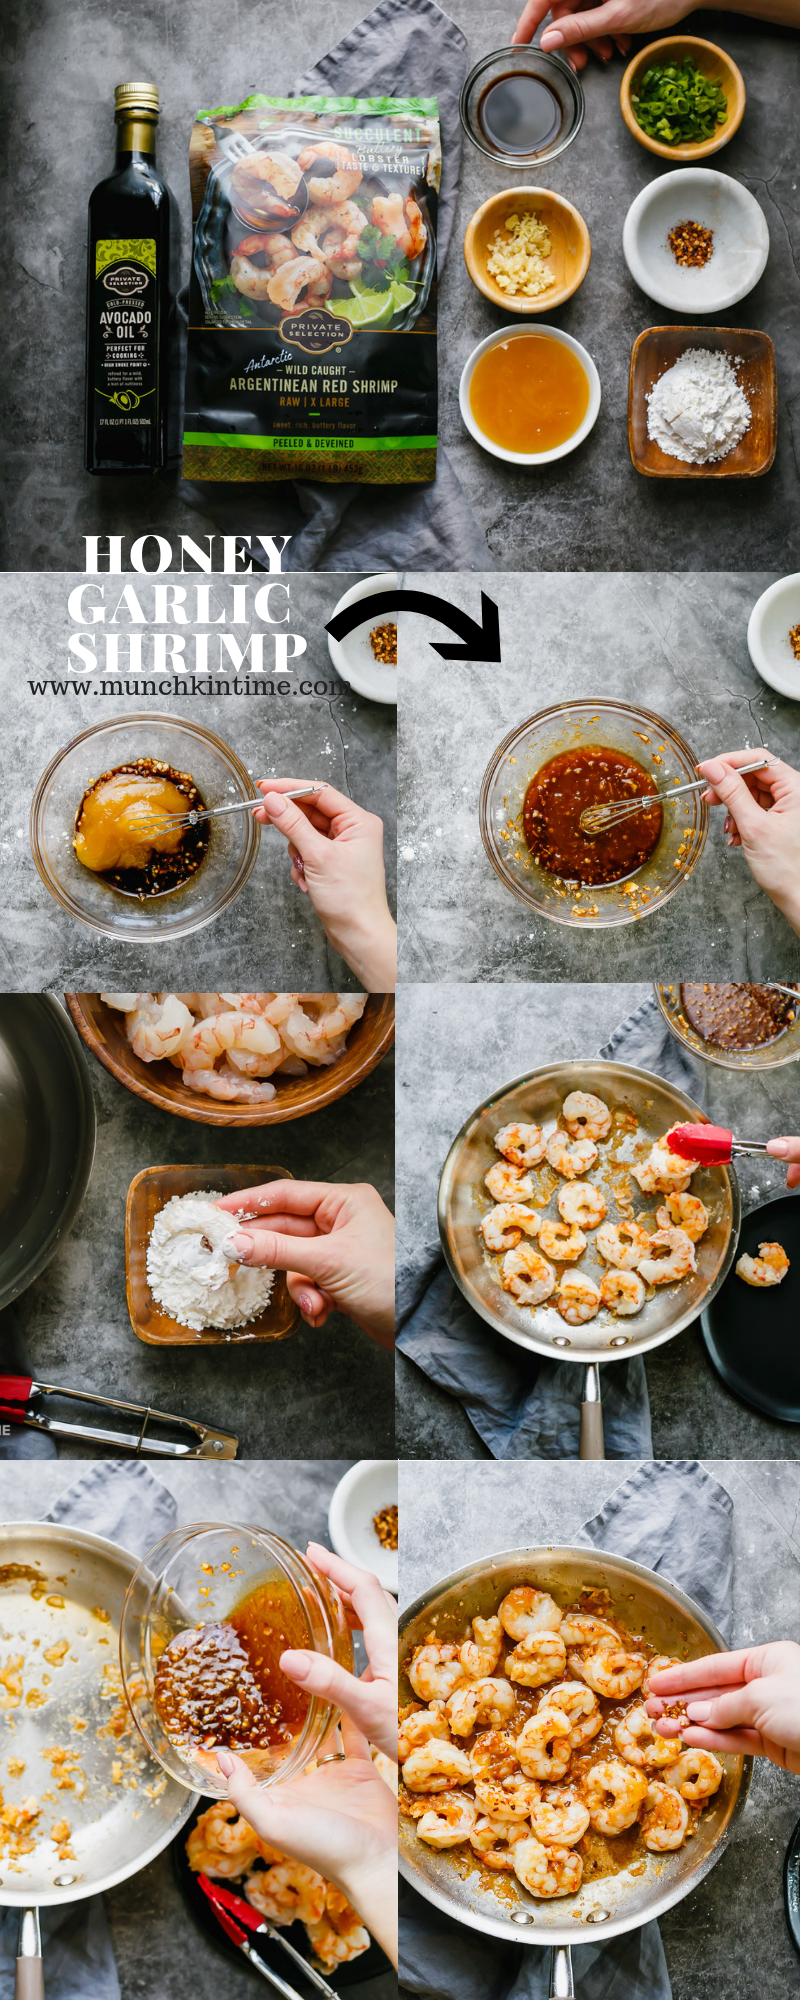 Scrumptiously Sticky Honey Garlic Shrimp Recipe made in just 10 minutes are here to please your seafood cravings.